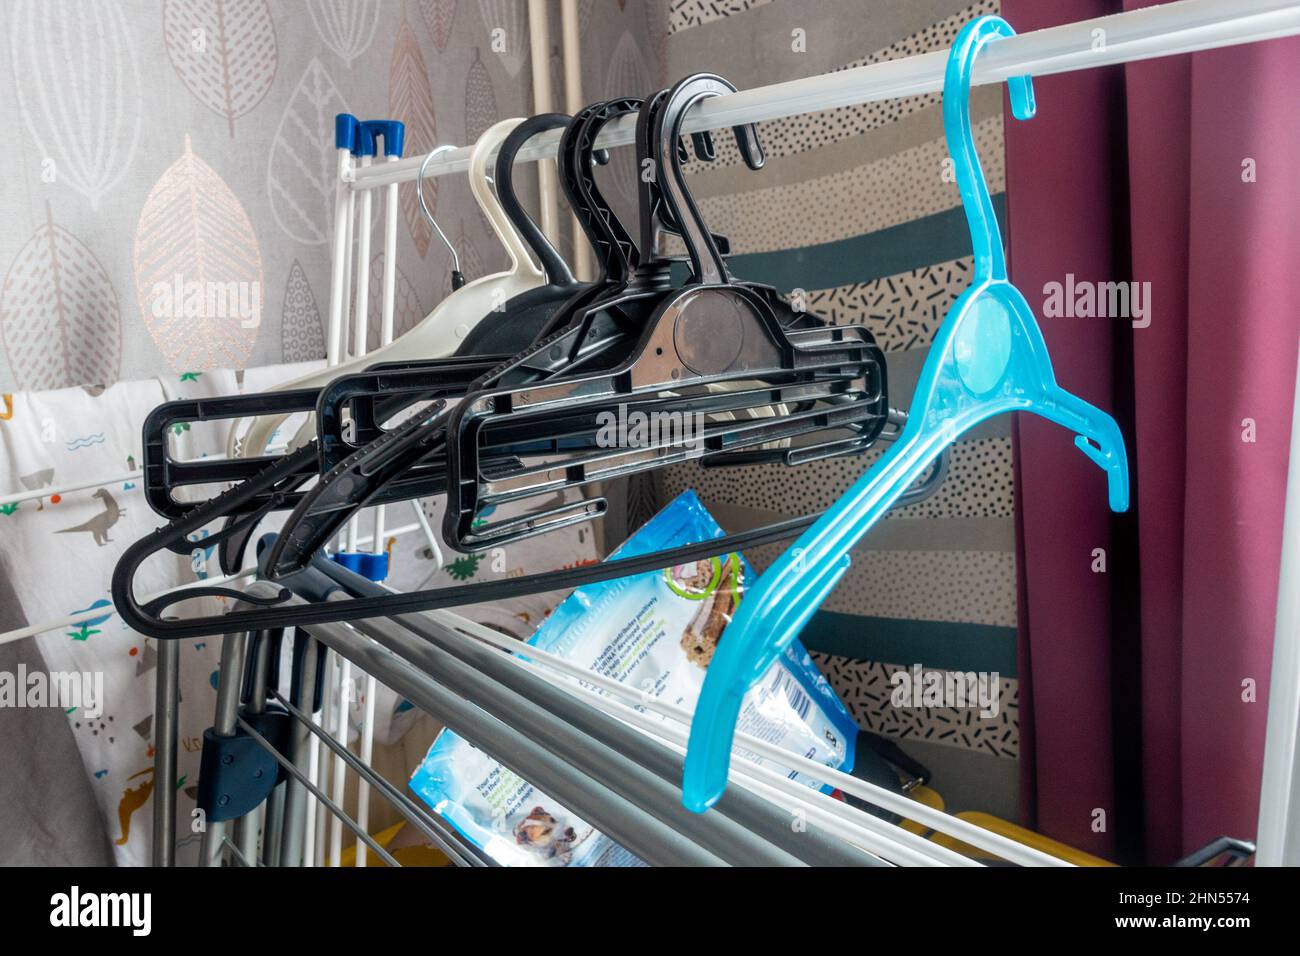 Plastic coat hangers hung from a folded up drying rack. Stock Photo